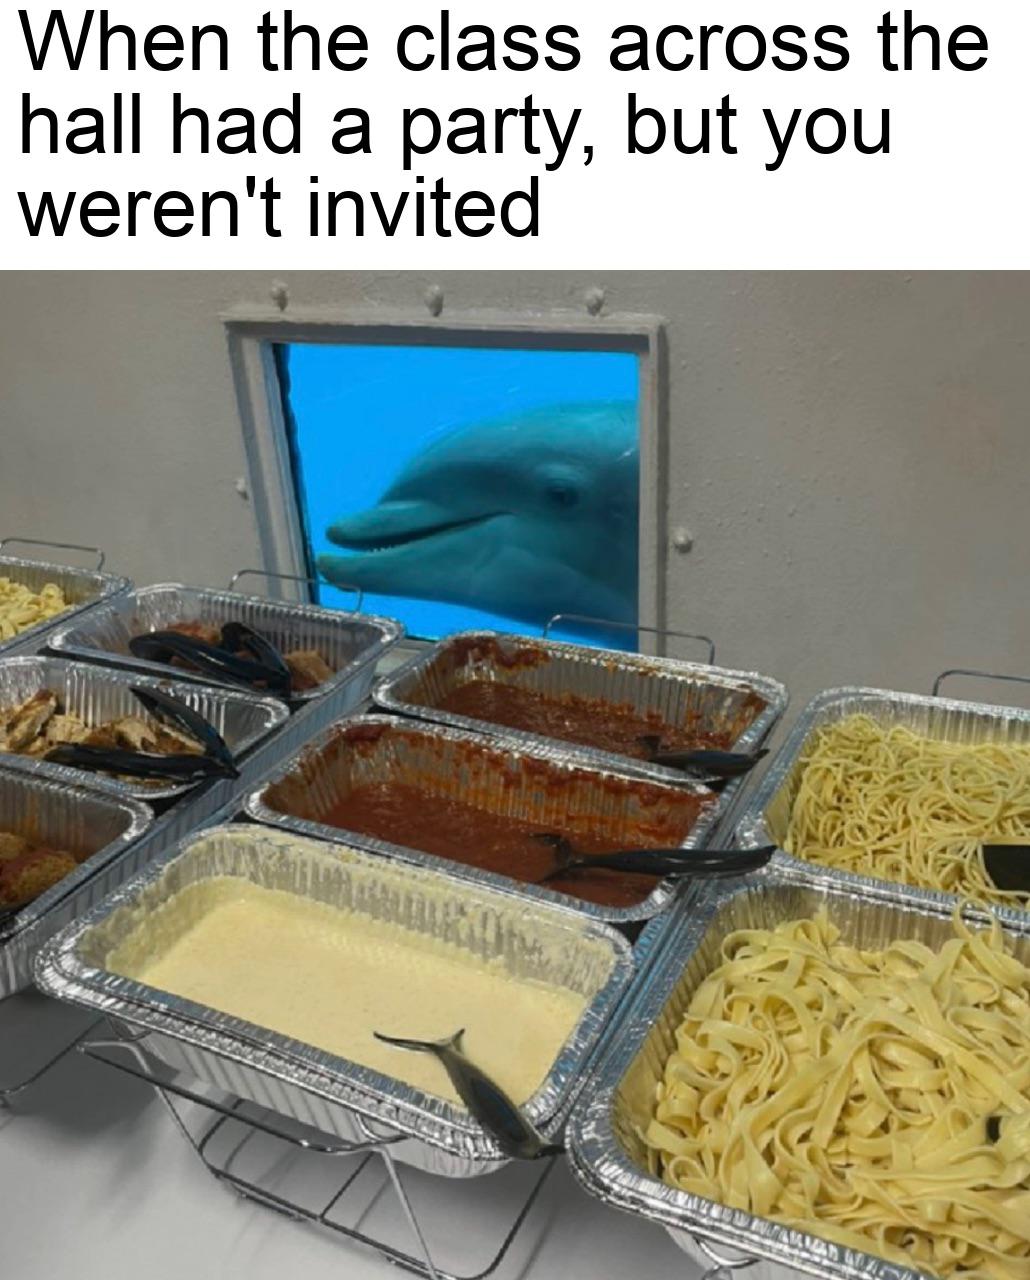 funny memes - dank memes - food - When the class across the hall had a party, but you weren't invited